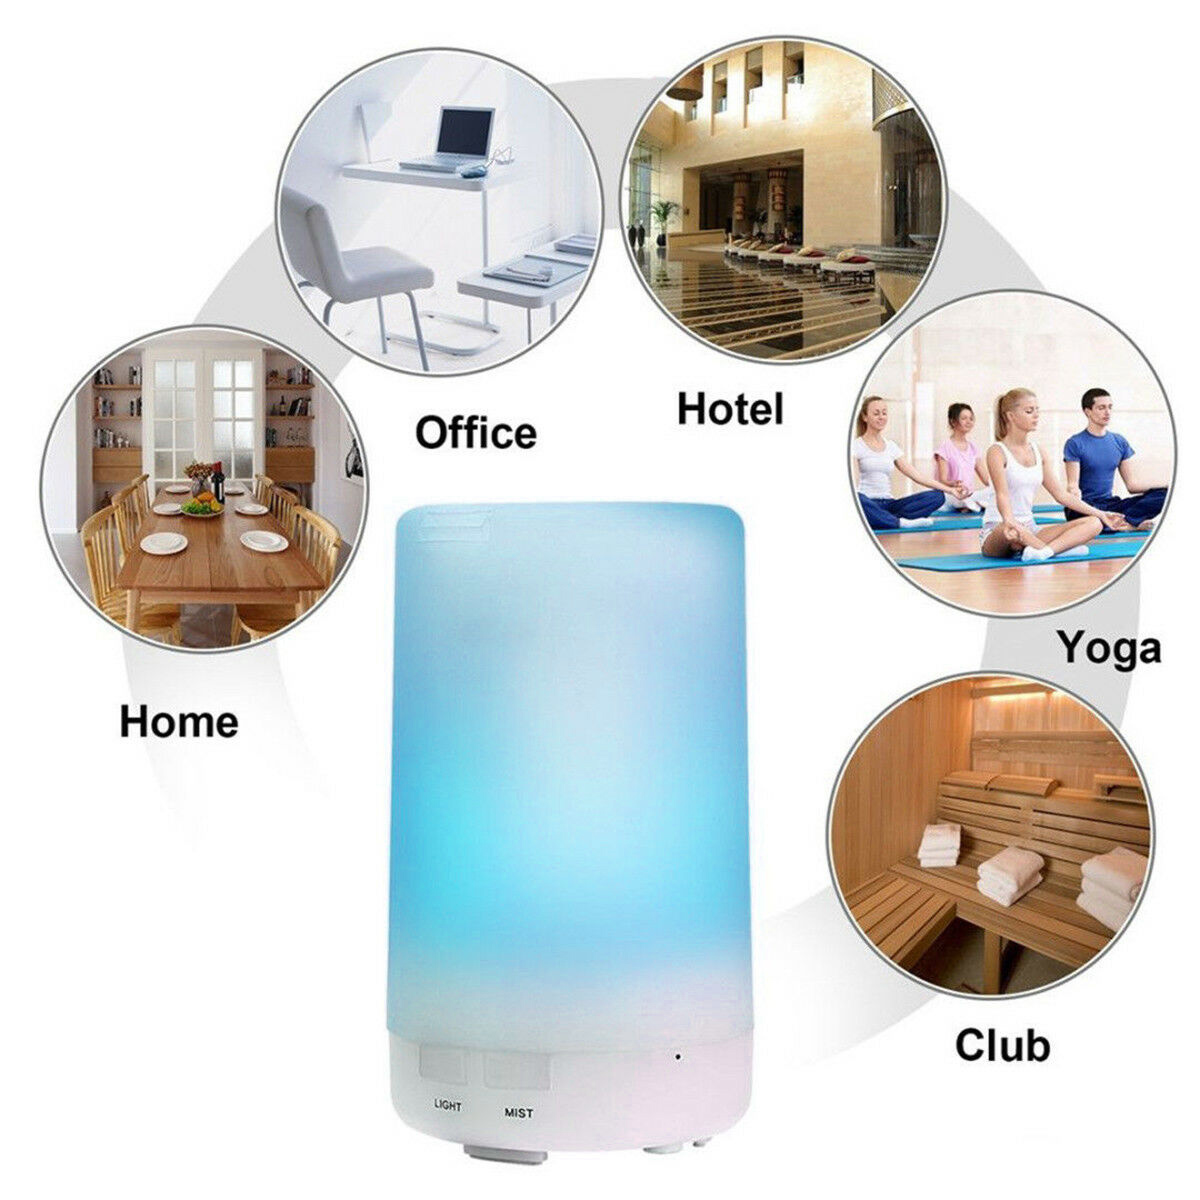 7-LED-Ultrasonic-Aroma-Essential-Diffuser-Air-Humidifier-Purifier-Aromatherapy-Timing-Function-1605103-6